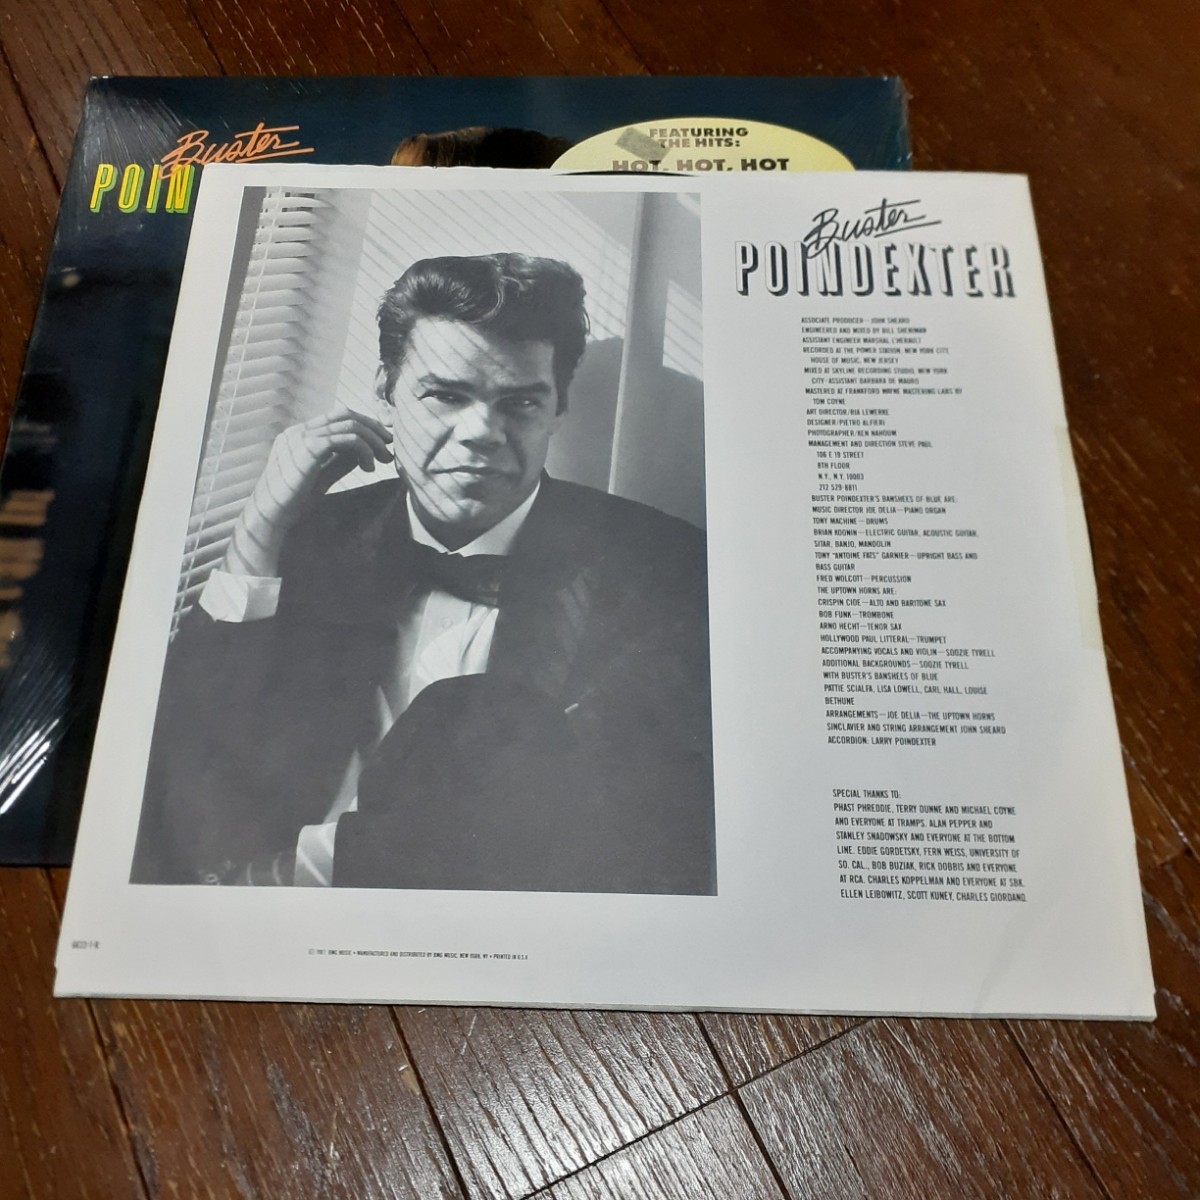 BUSTER POINDEXTER / SAME /LP/SMACK DAB IN THE MIDDLE/HOT HOT HOT/SWING,JIVE,SOCA,クボタタケシ_画像6